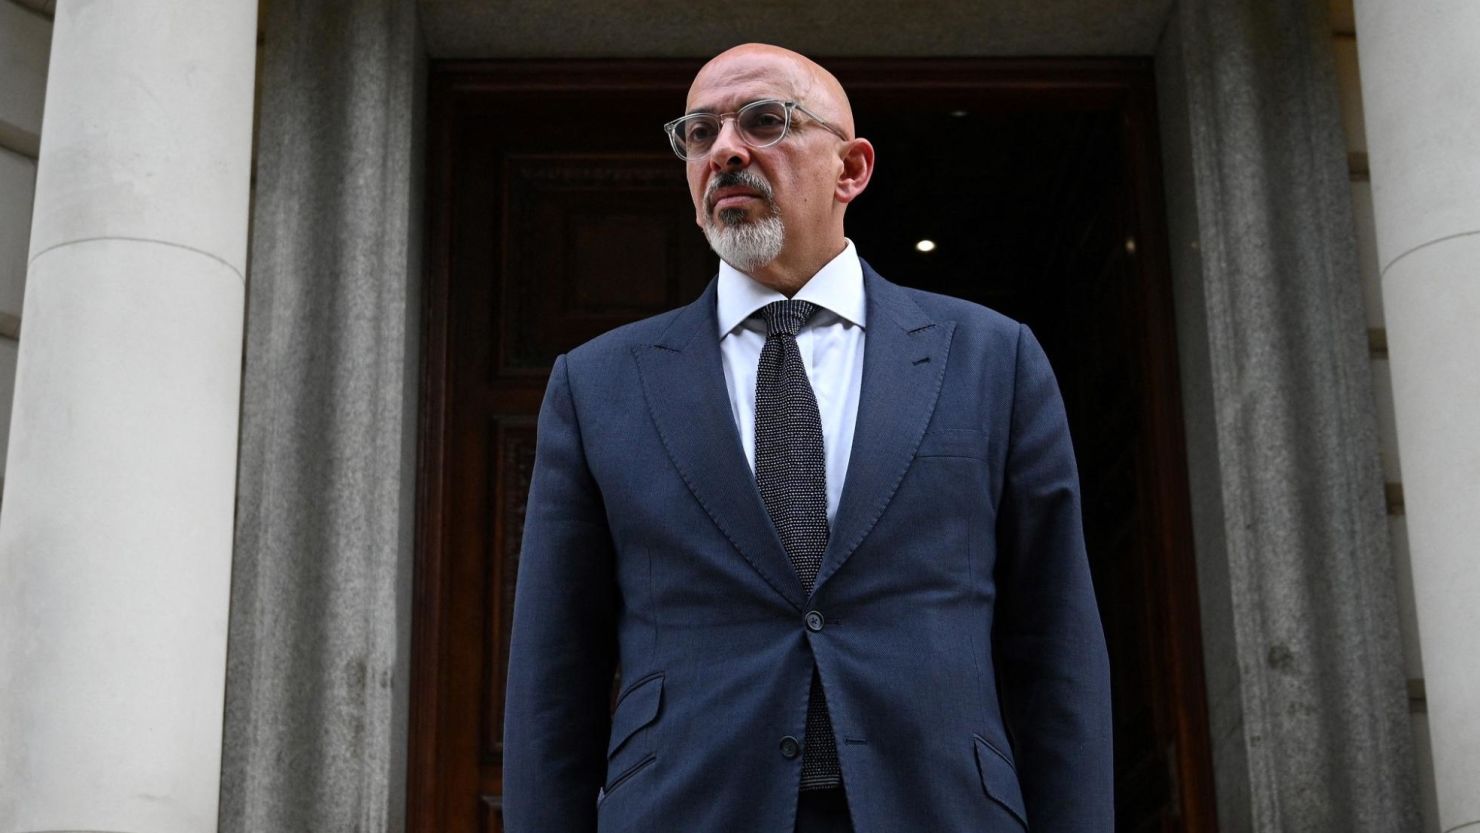 Nadhim Zahawi was born in Iraq to Kurdish parents and came to the UK as a child, when his family fled Saddam Hussein's regime.